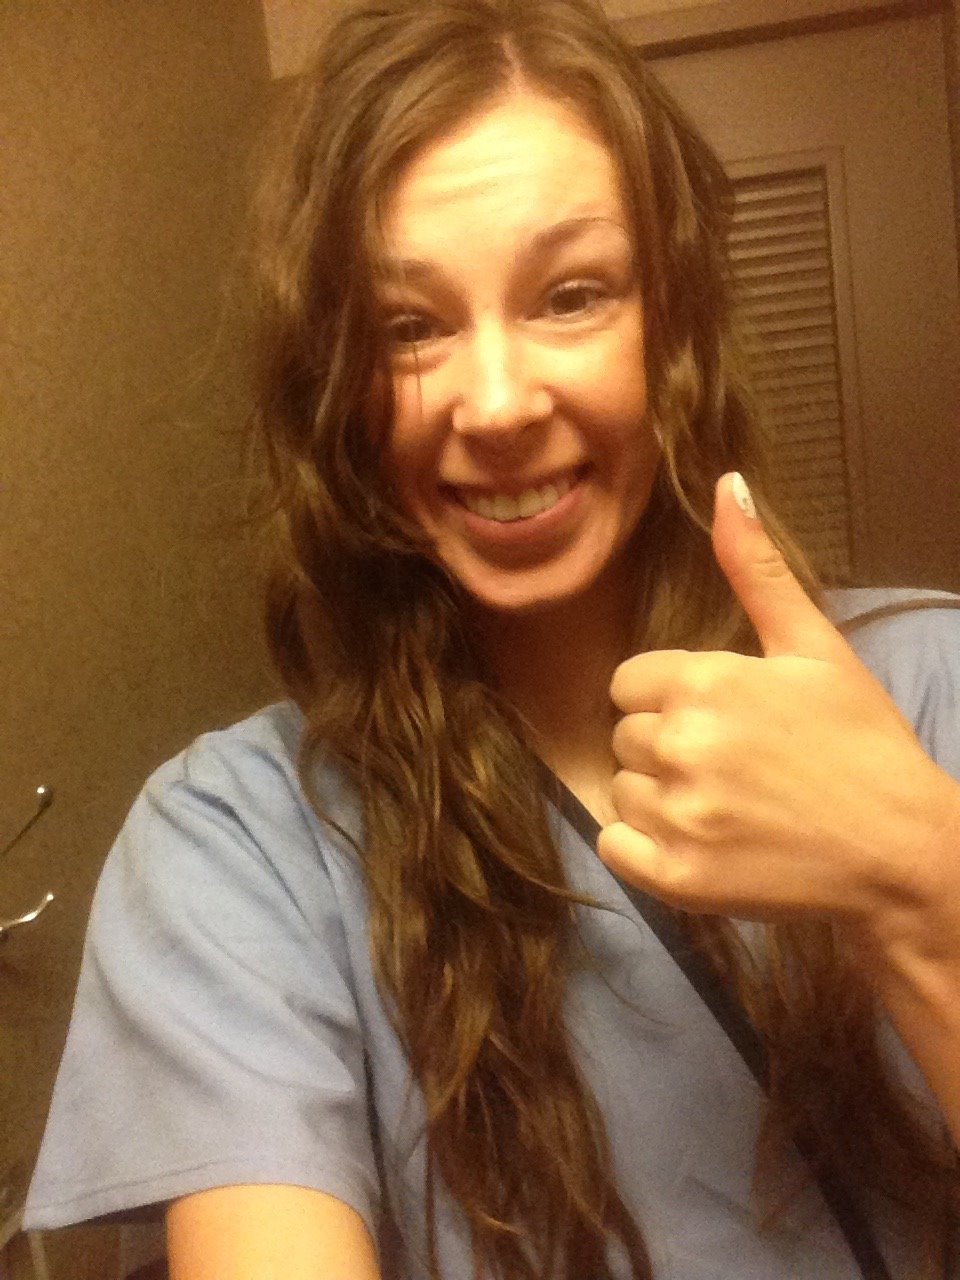 Jenna wearing blue medical gown inside the dressing room giving a thumbs up